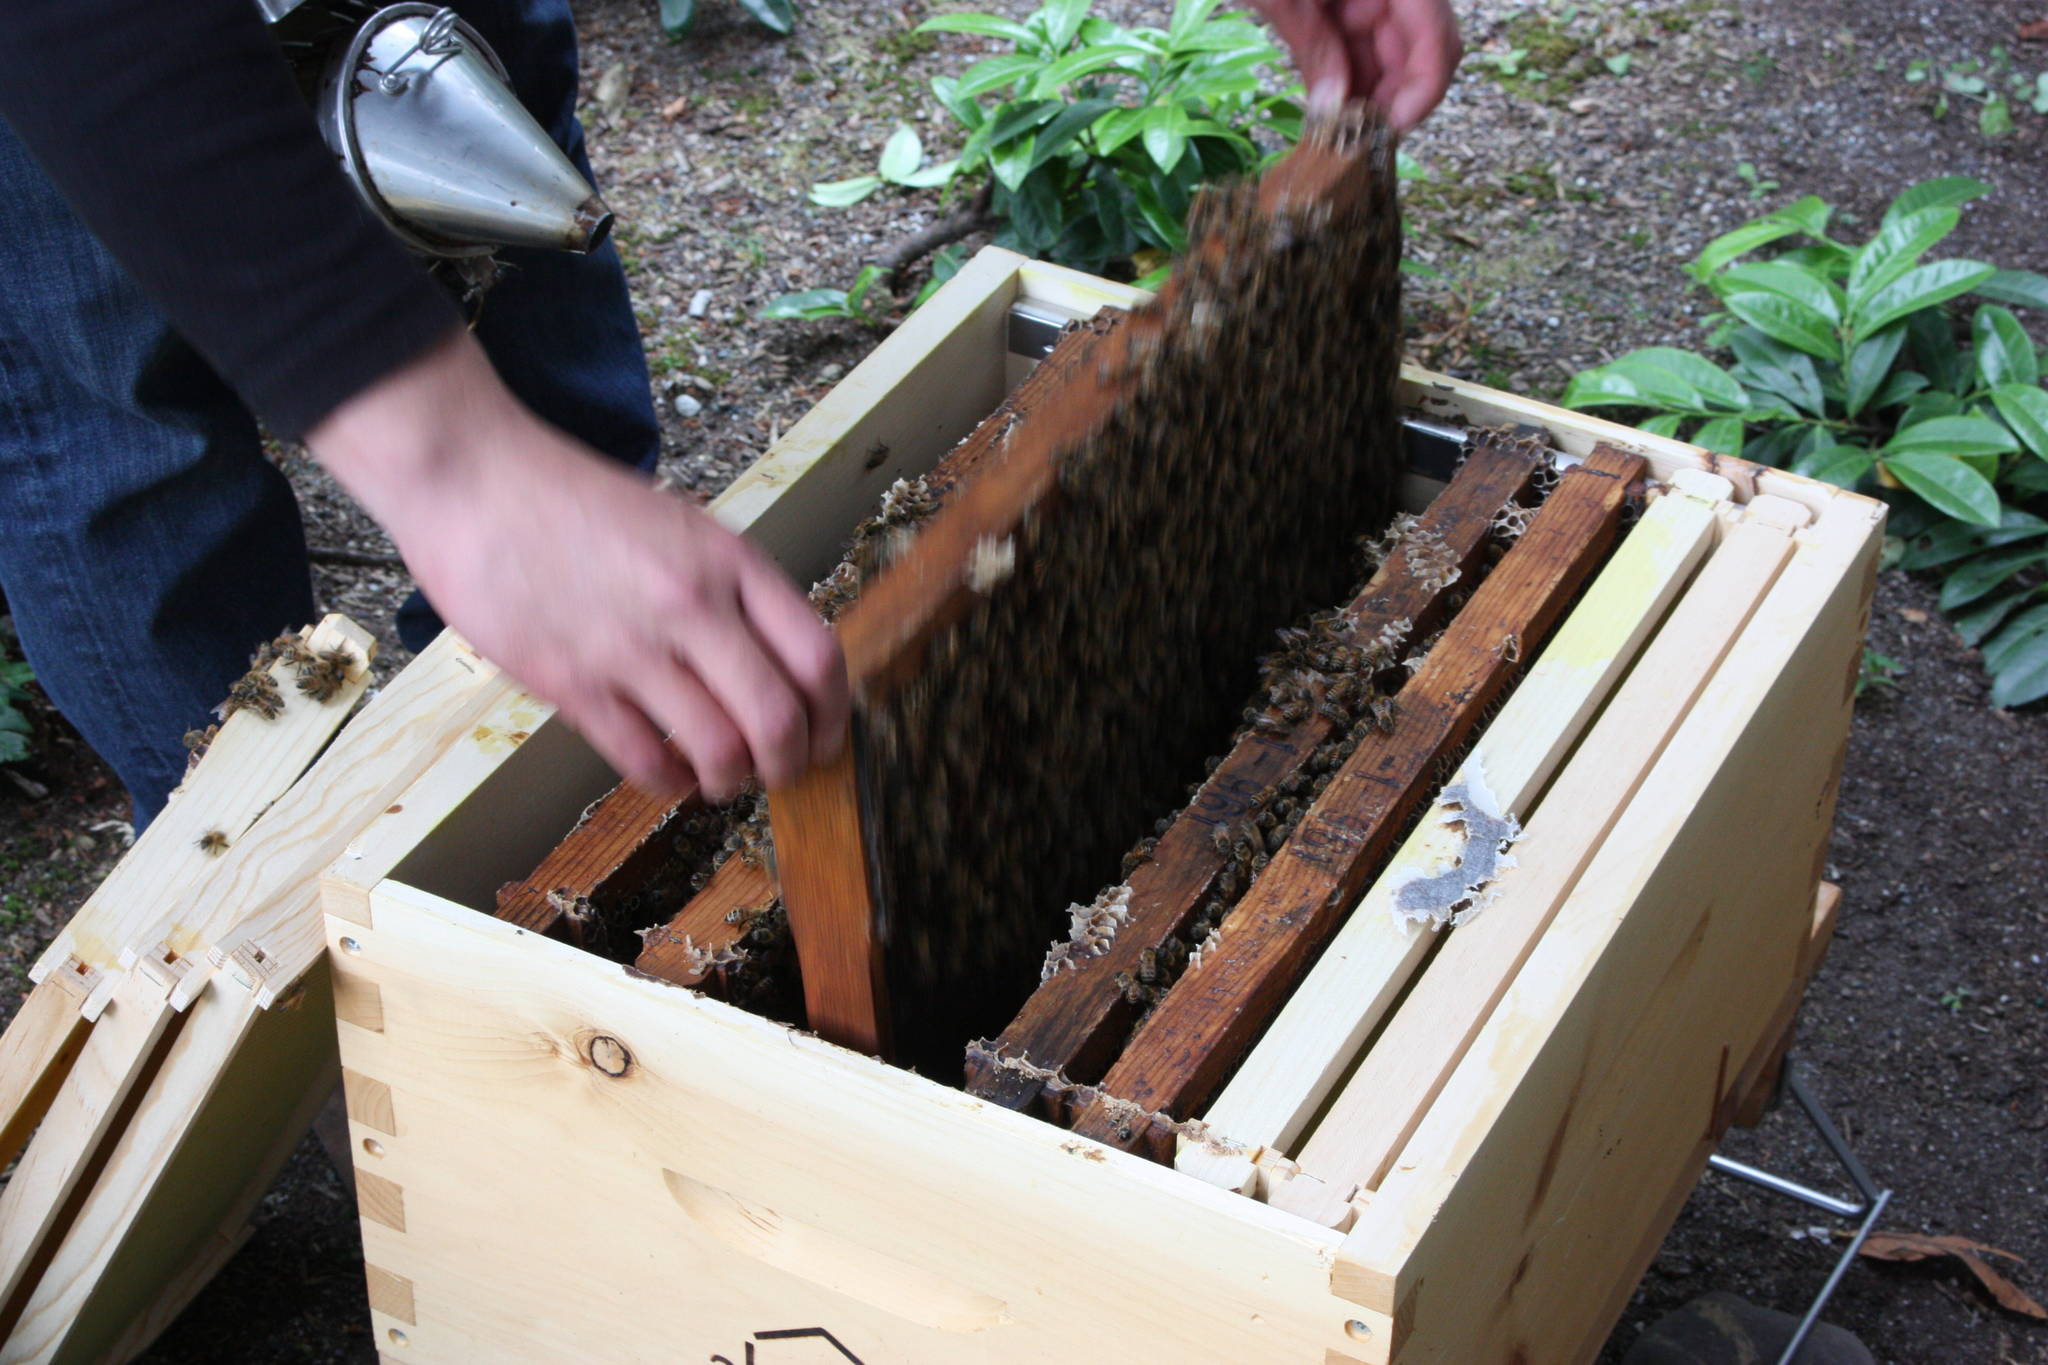 Pedro Miola removes a panel out of the hive box. (Photo by Cameron Sheppard)